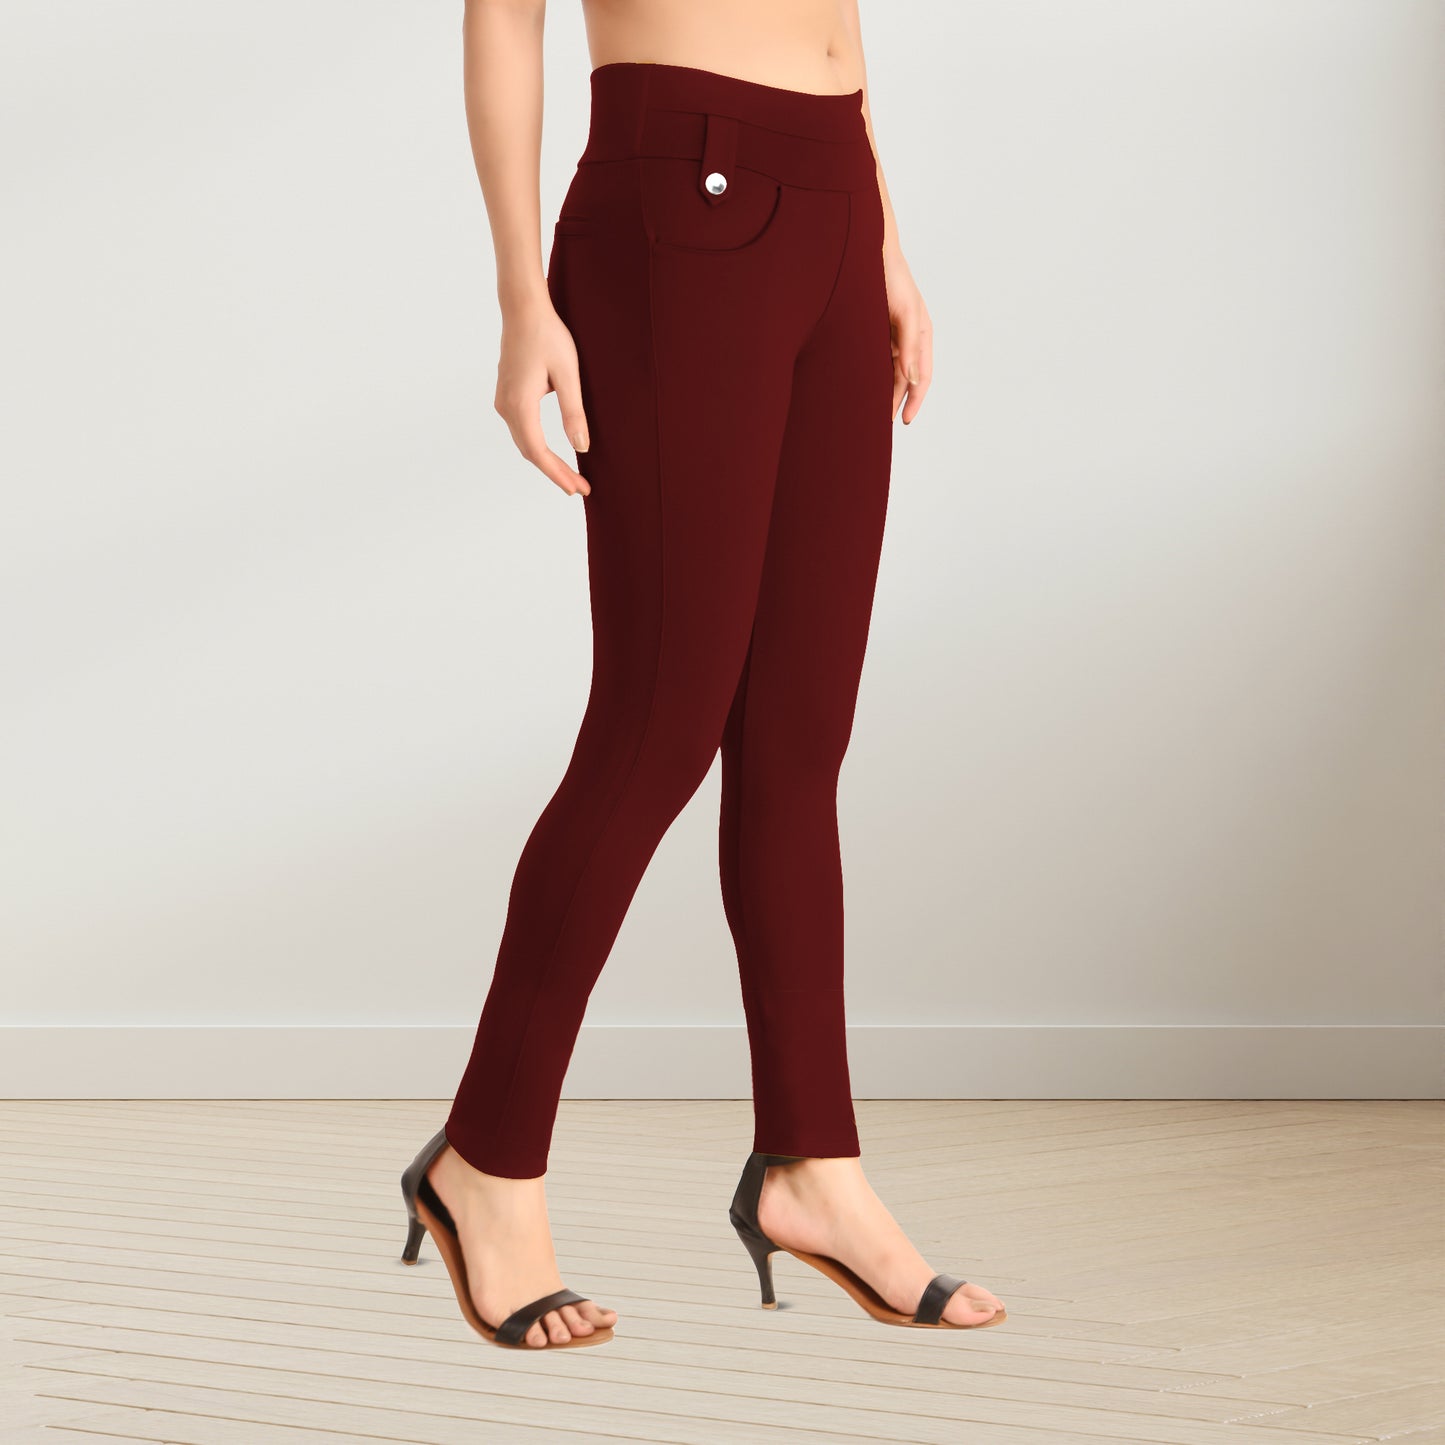 Comfortable Women's Mid-Waist Jeggings with 2 Front Pockets - Maroon